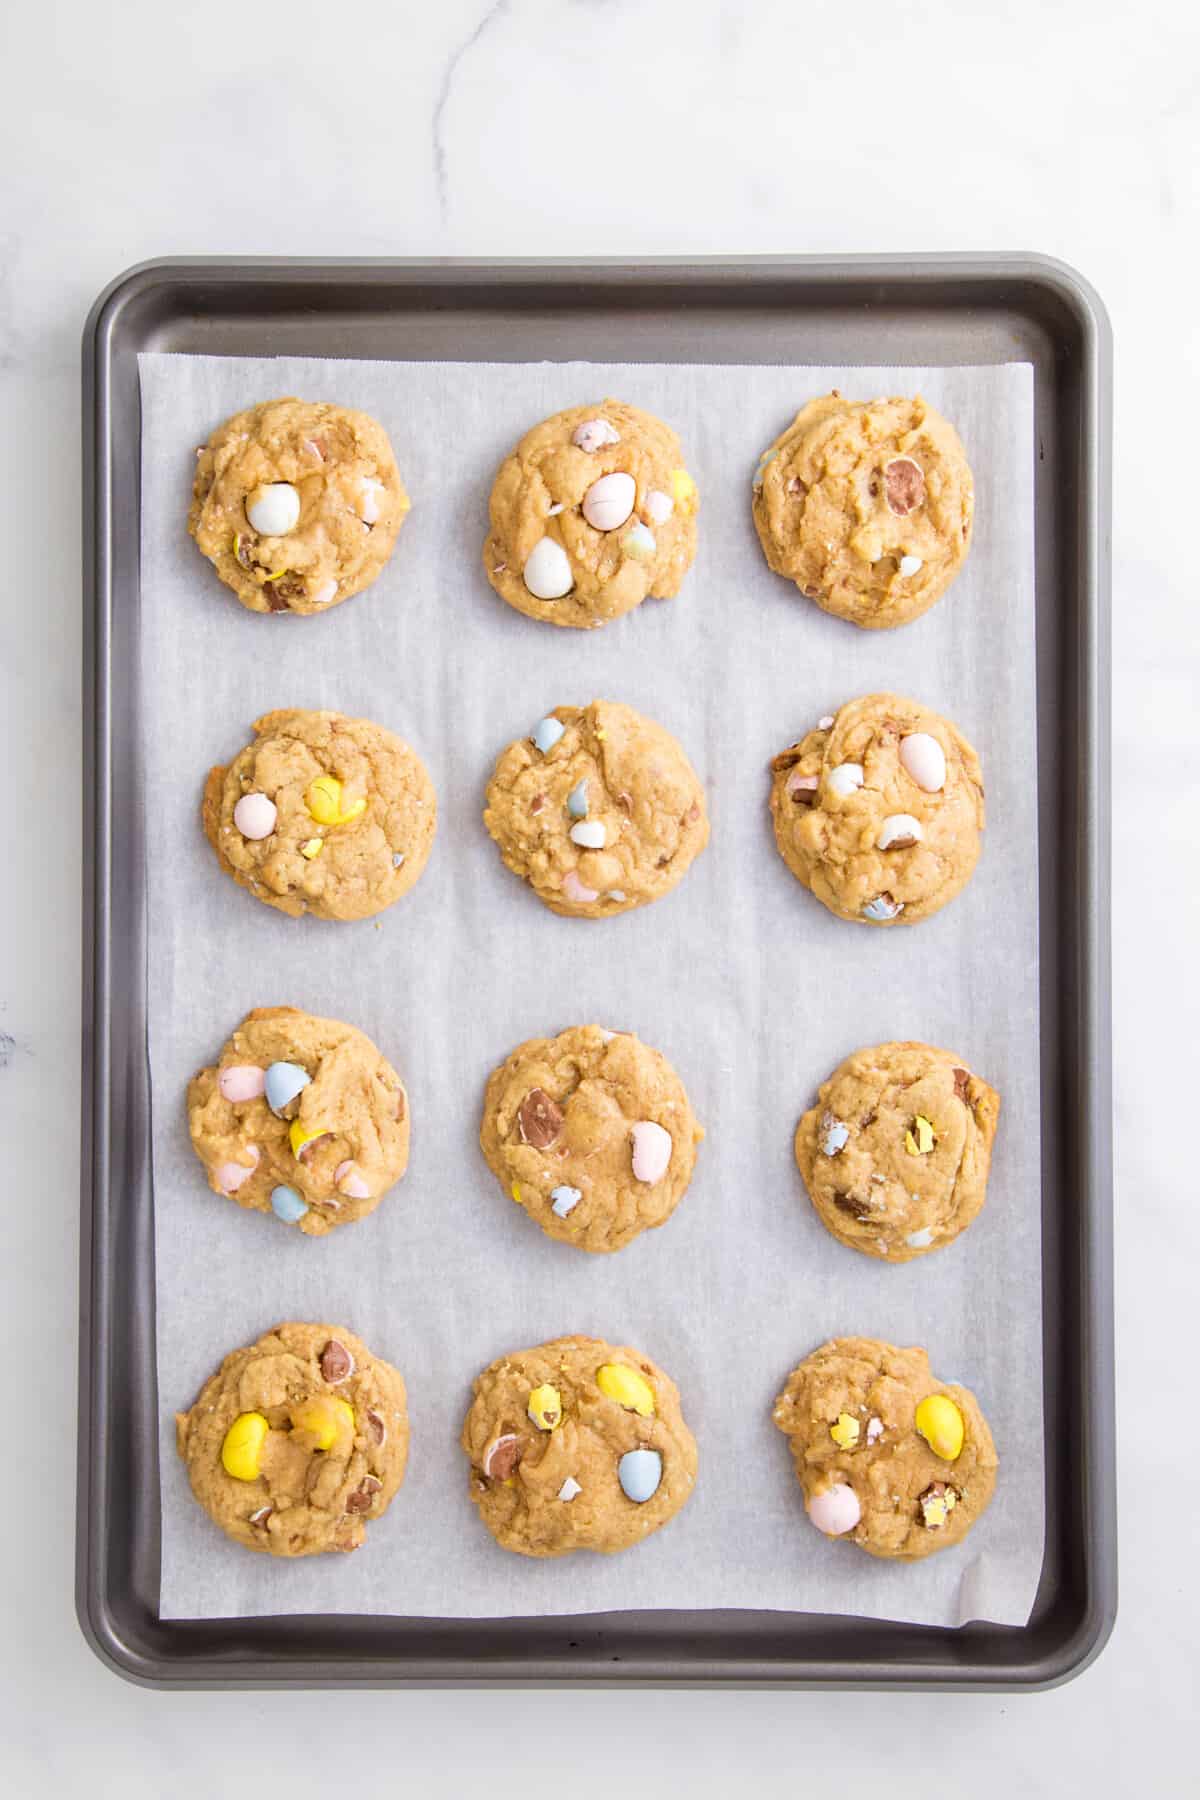 12 baked cadbury egg cookie dough arranged on a parchment lined baking sheet.